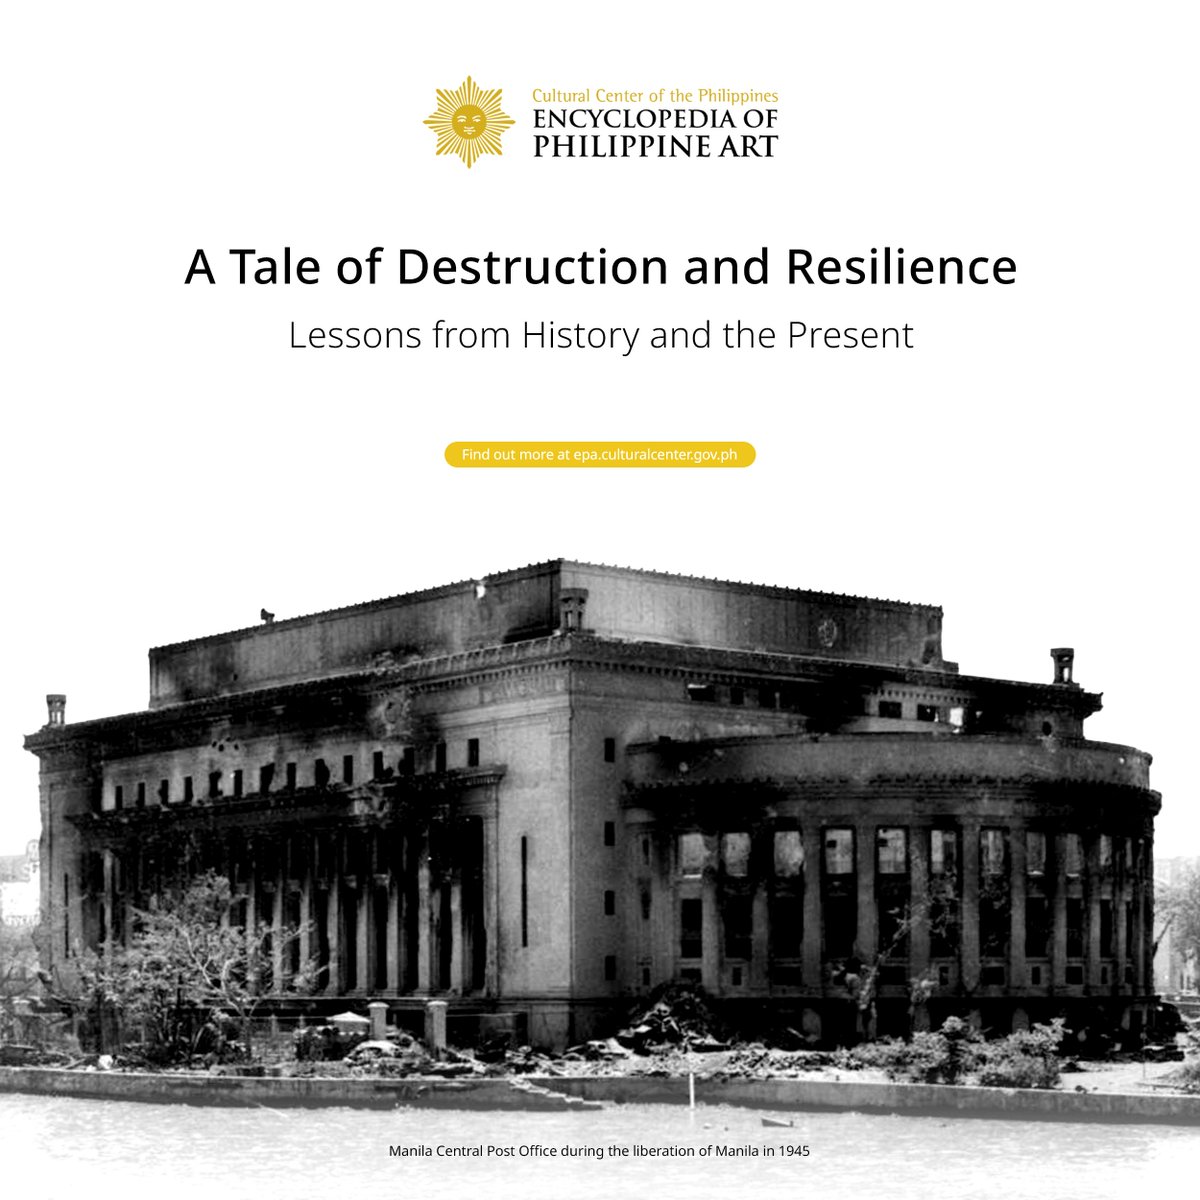 History has demonstrated that even the most resilient structures can vanish in a mere moment.

The story of the Manila Central Post Office demands our attention and calls for reflection on the importance of preserving our cultural heritage.